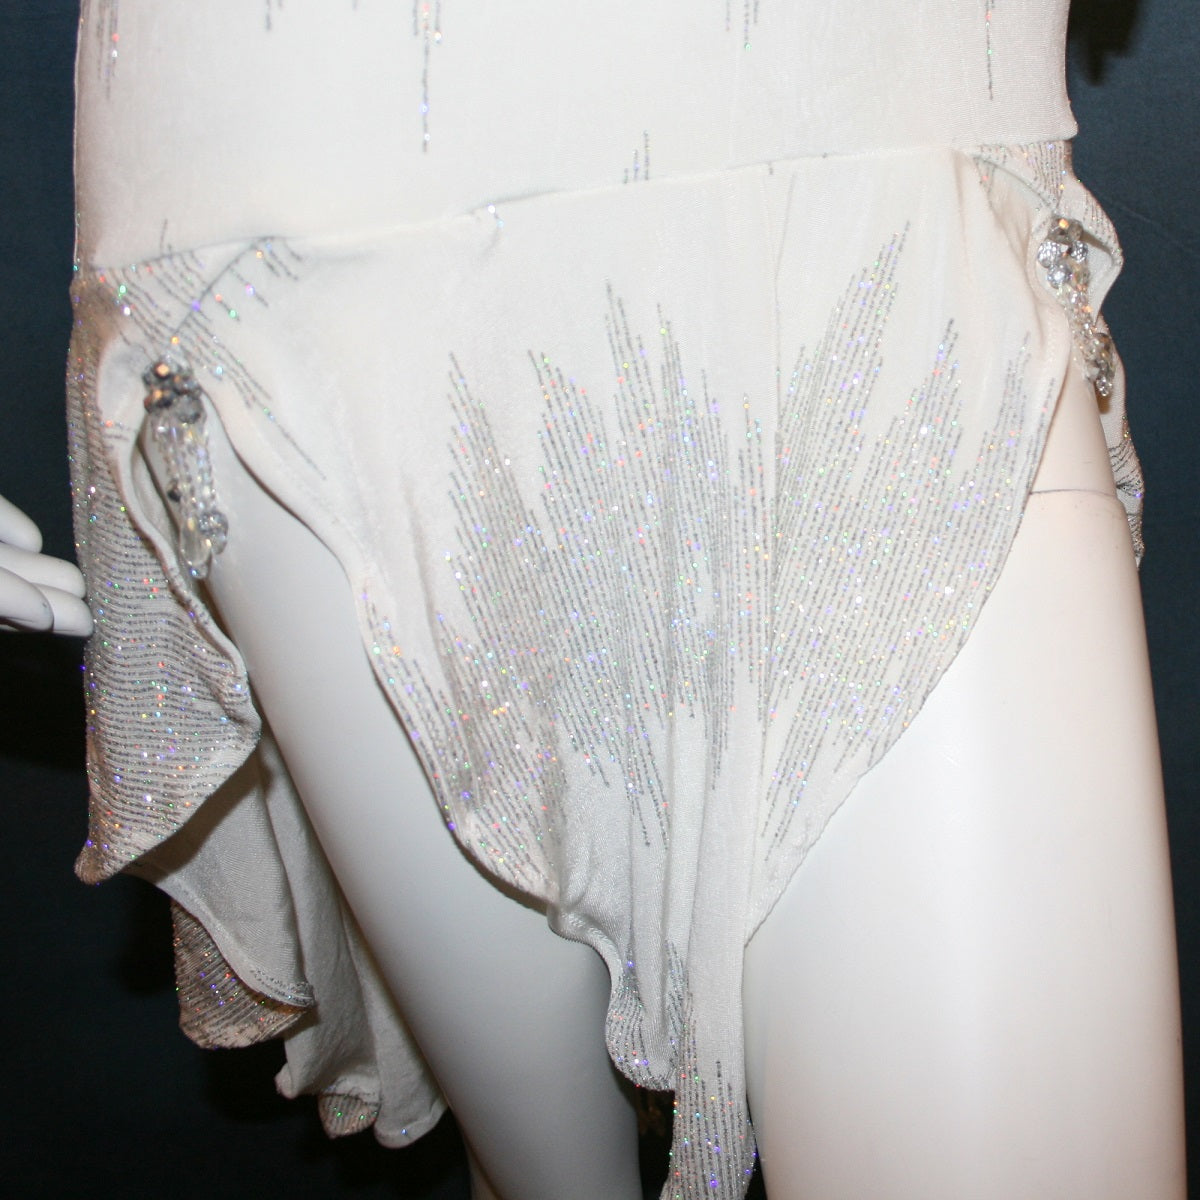 details in skirt of White Latin/Rhythm dress created in glitter slinky with an awesome electrifying glitter pattern, features long sleeves, lattice strap details on back & a touch of Swarovski hand beading in the skirting.